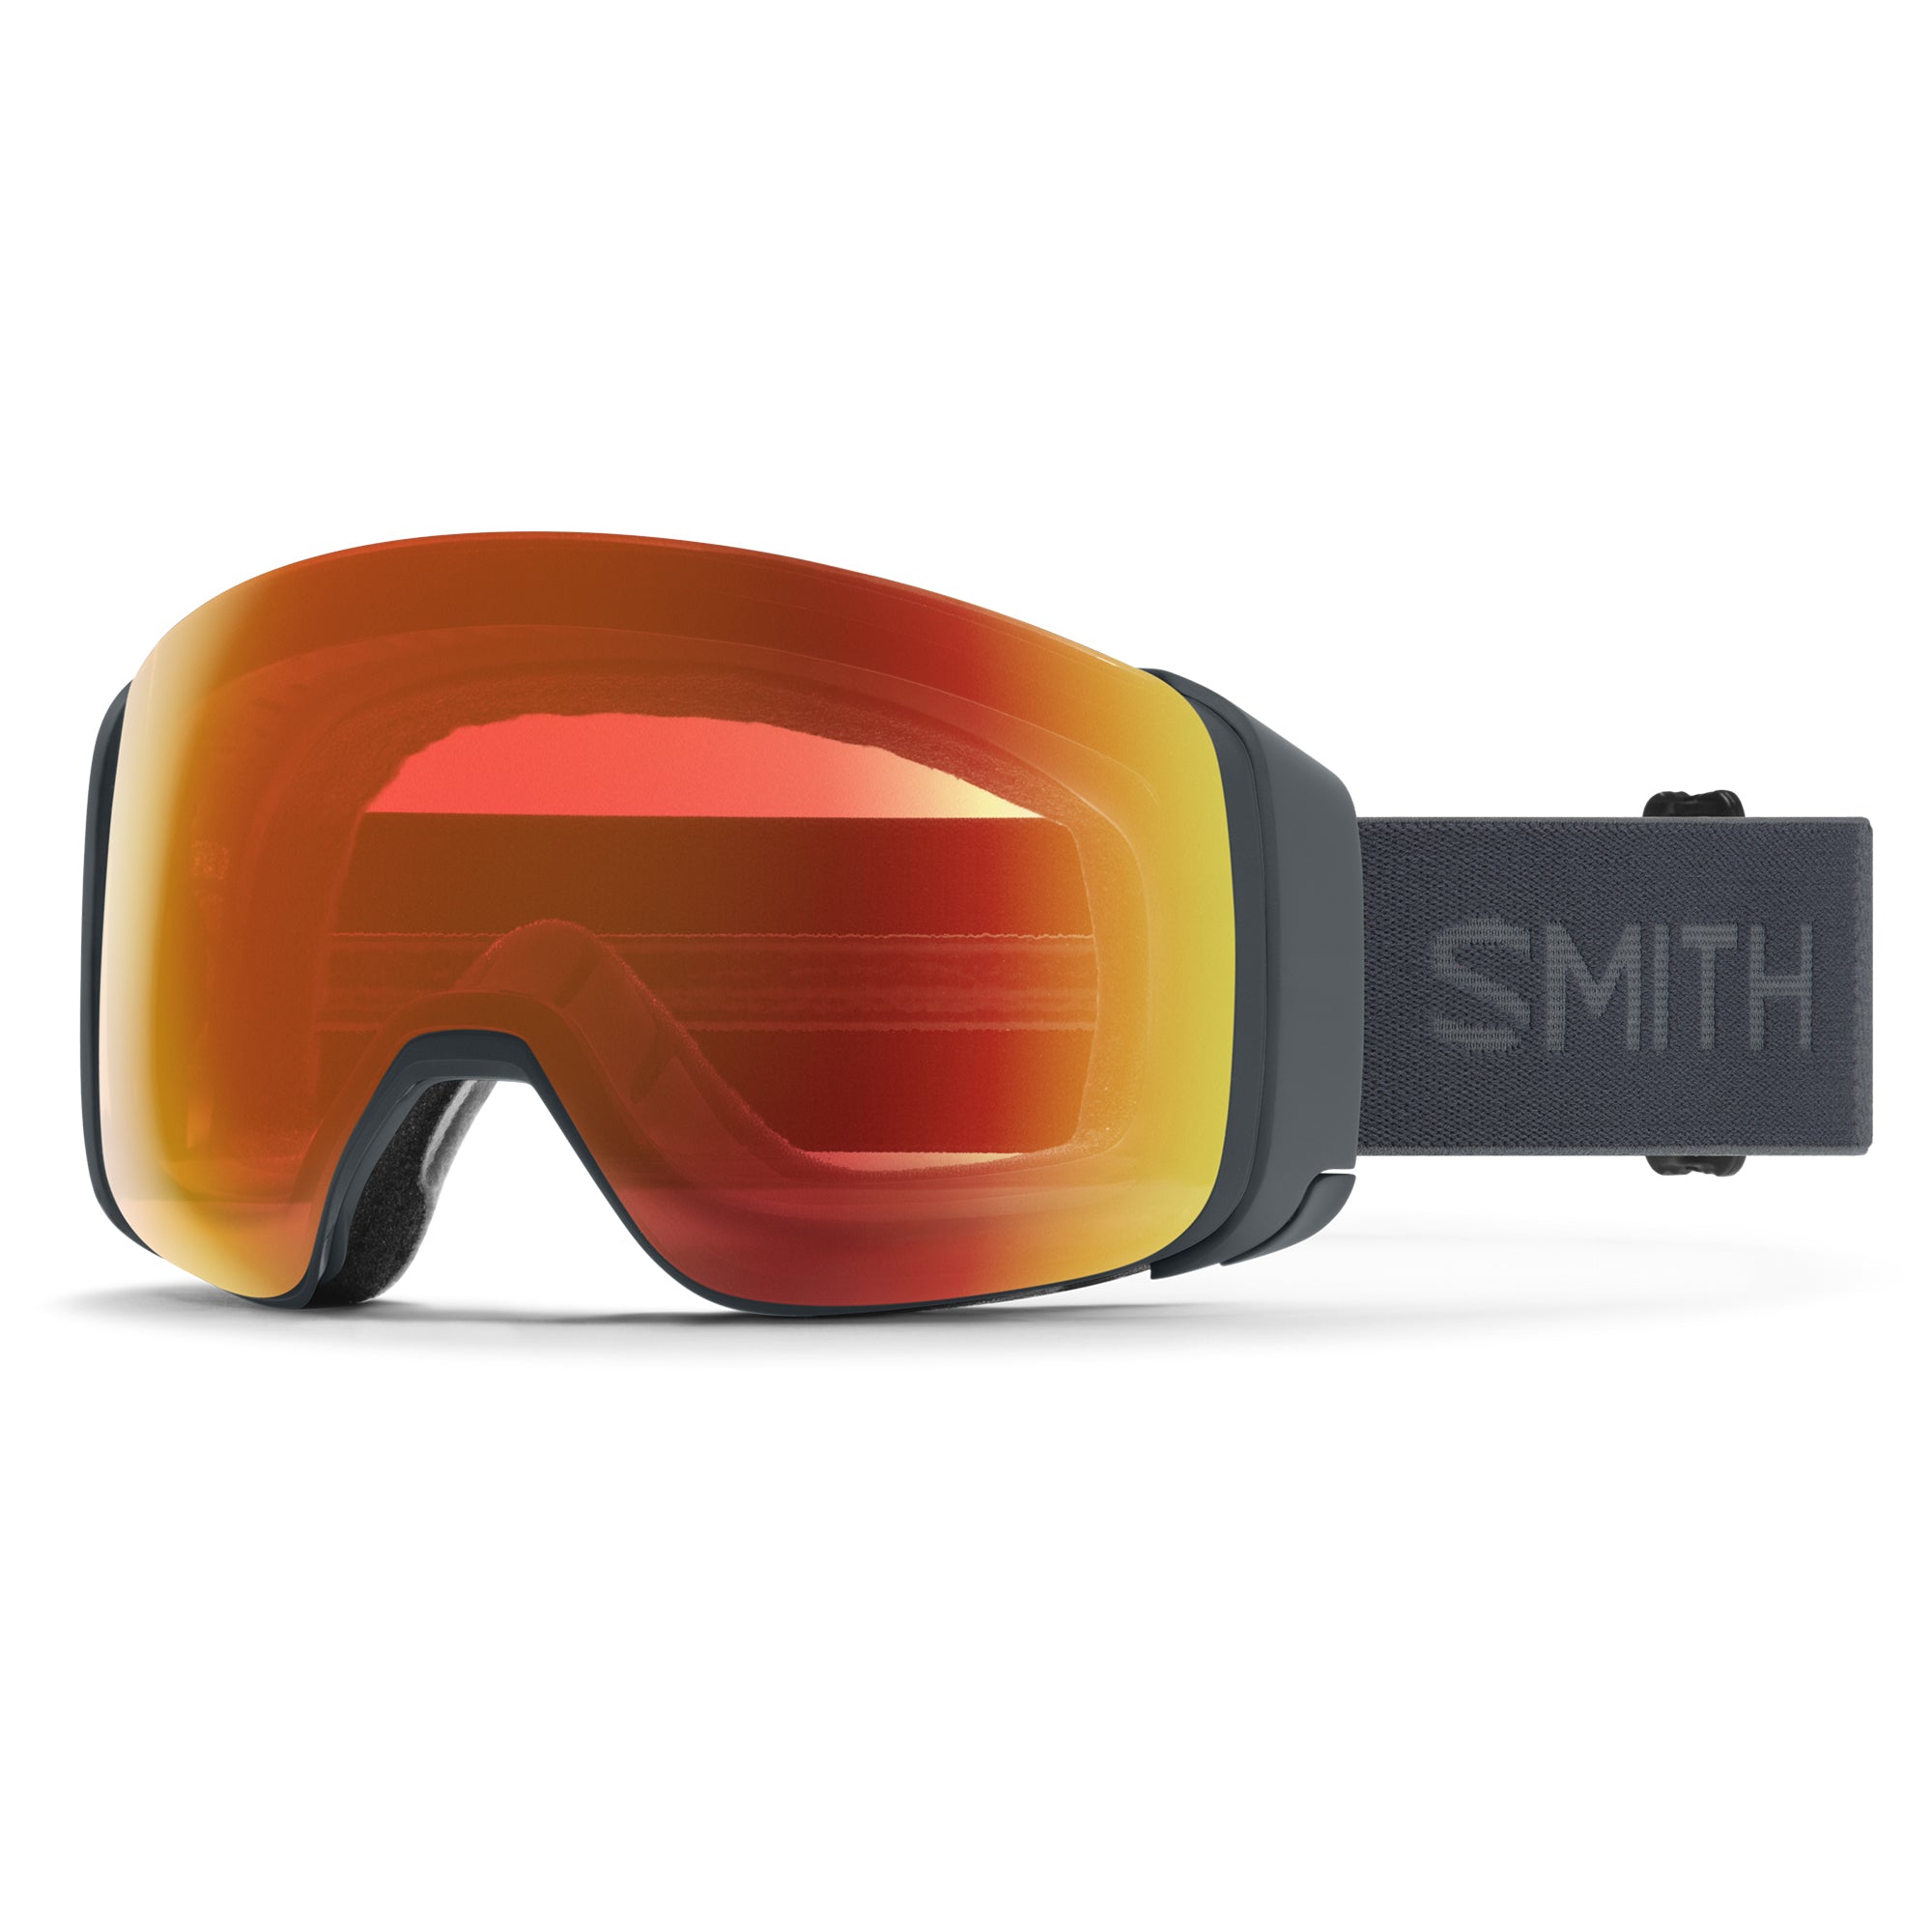 Smith 4D MAG Goggles Fresh Skis